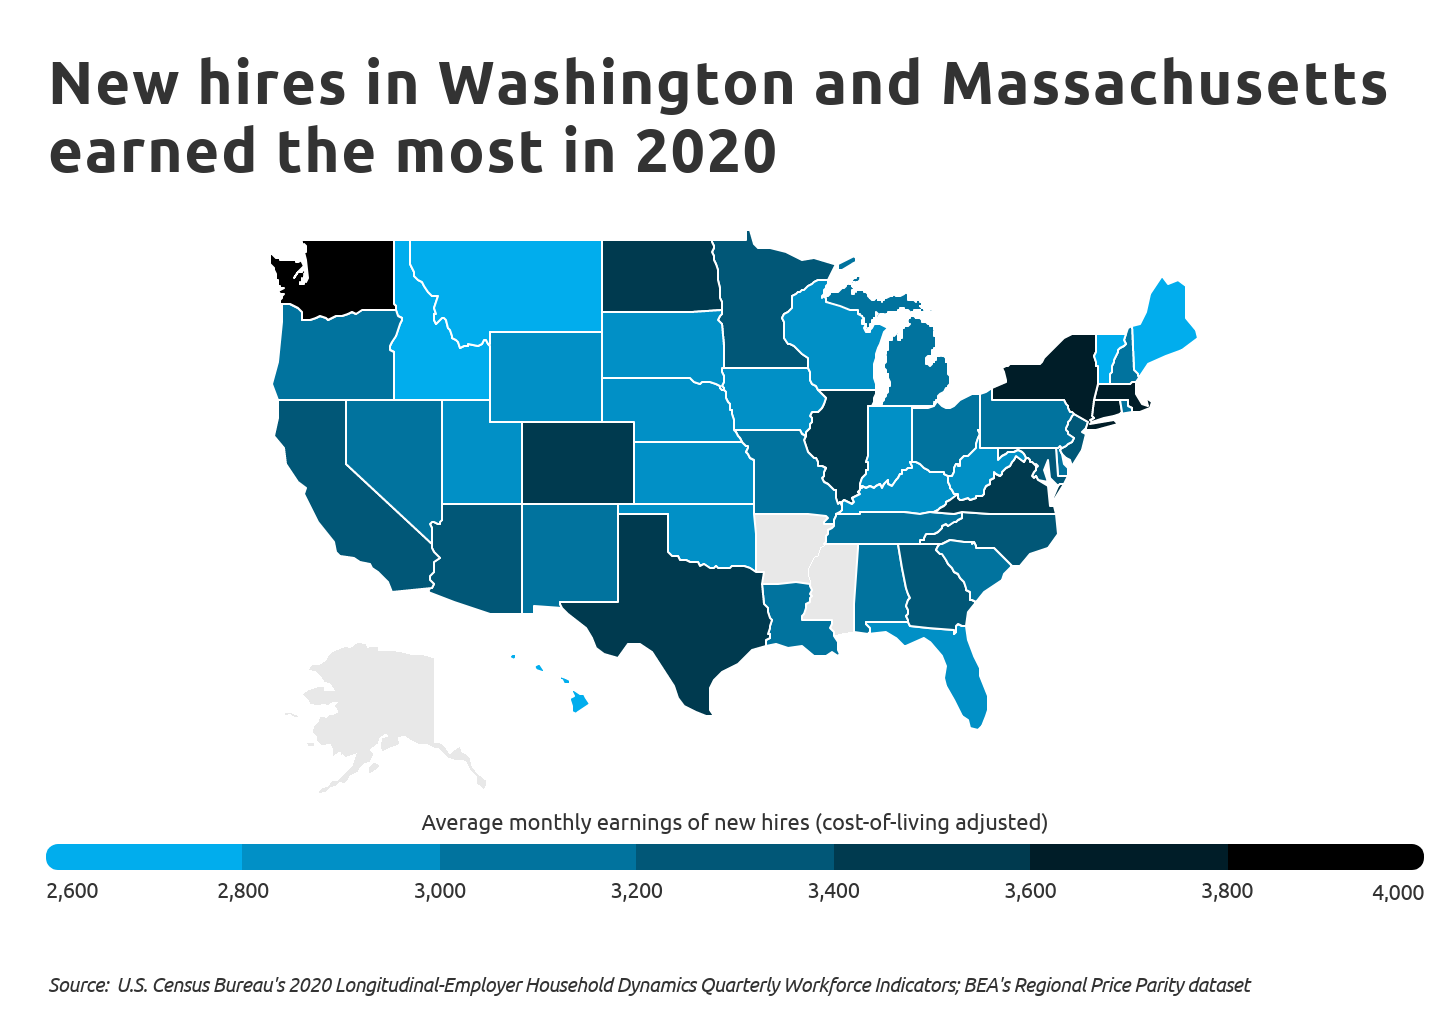 New hires in WA and MA earned the most in 2020